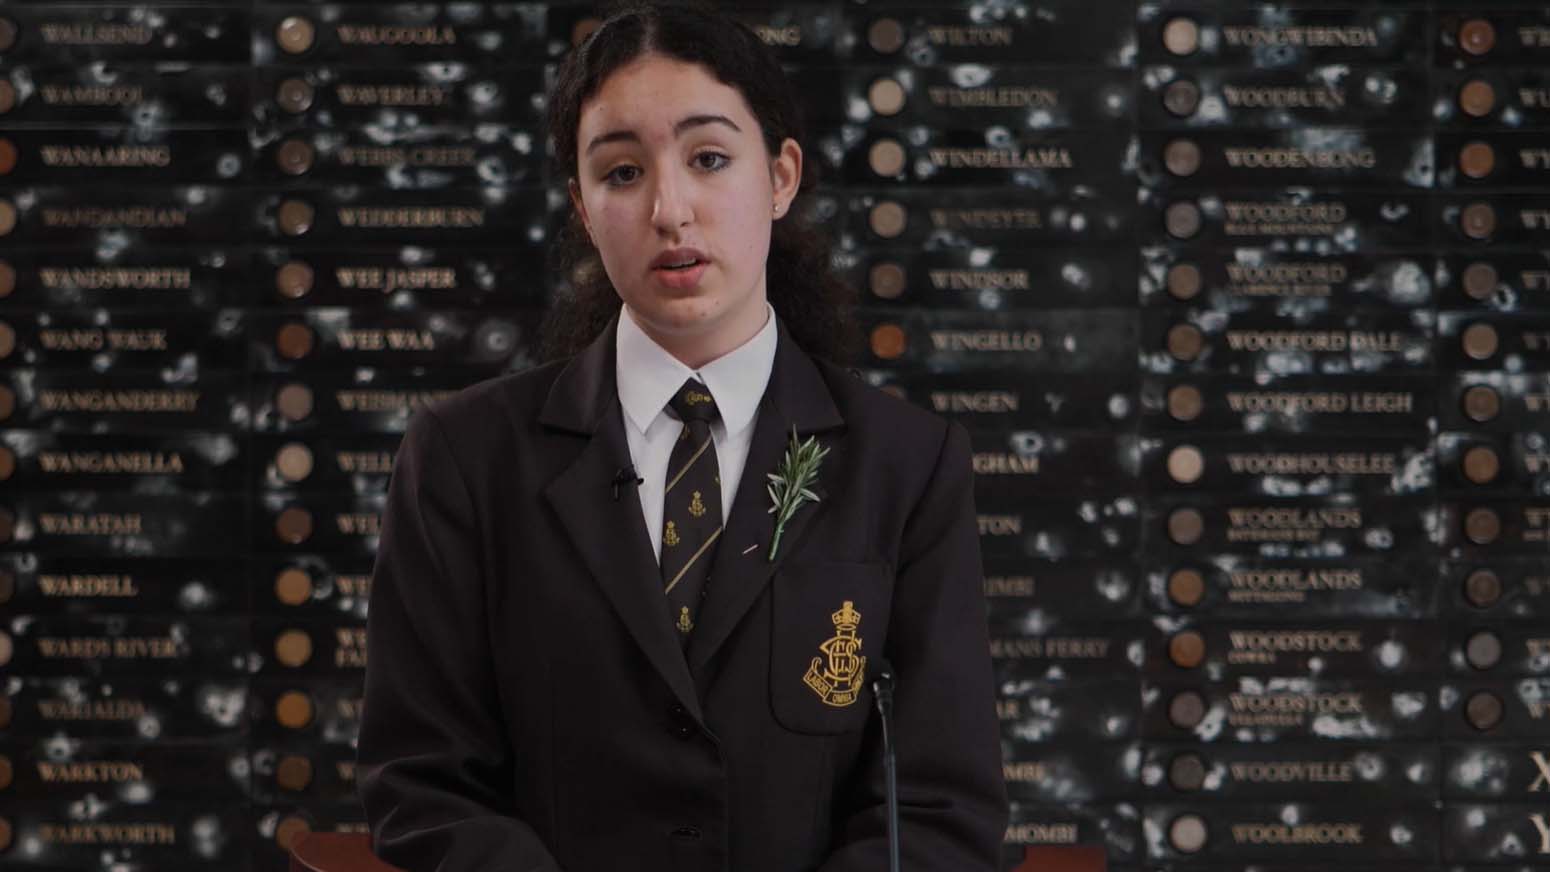 Female student wearing school blazer and rosemary sprig stands in front of a marble wall.